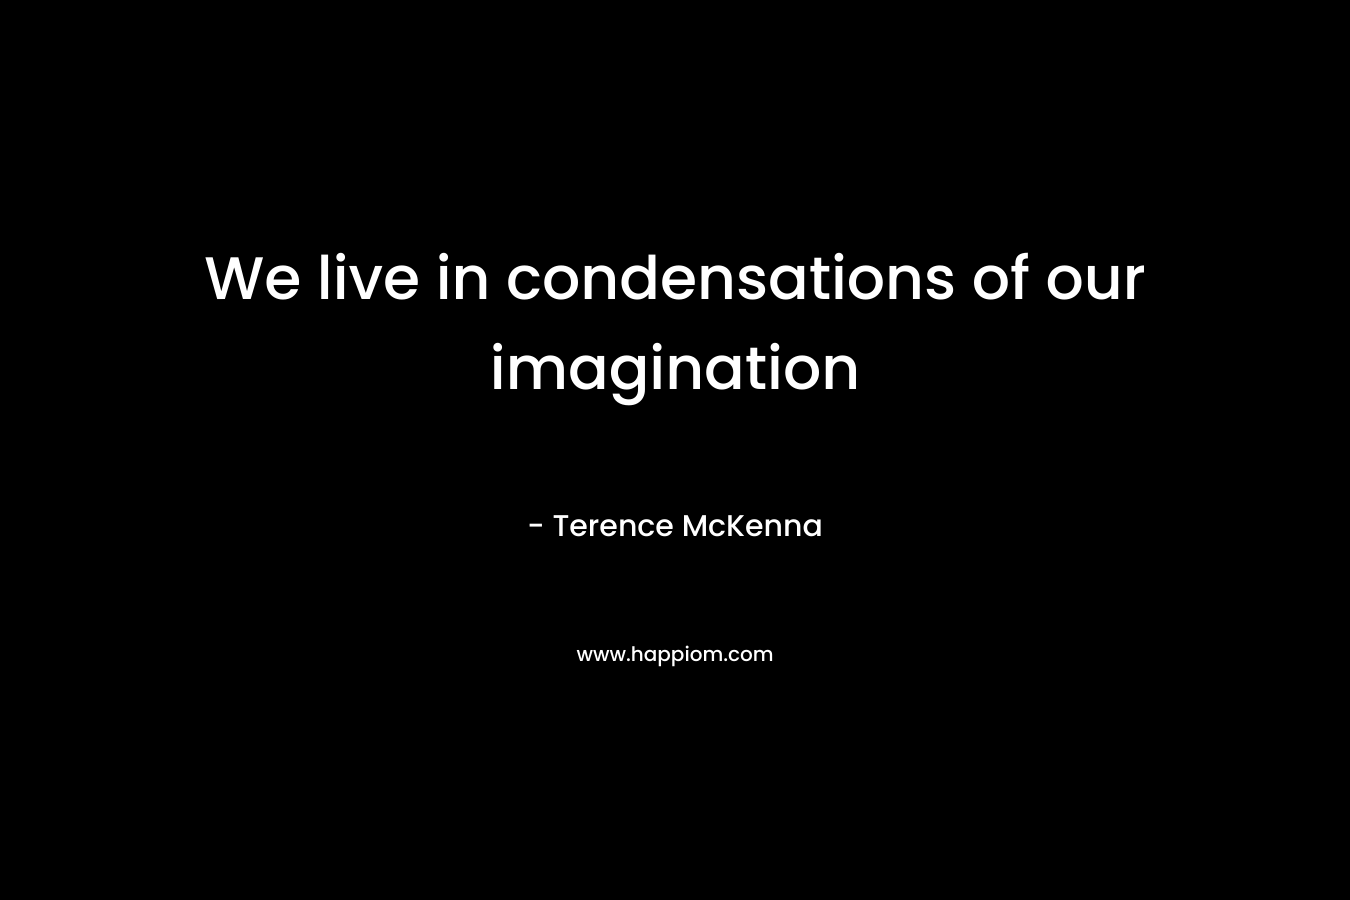 We live in condensations of our imagination